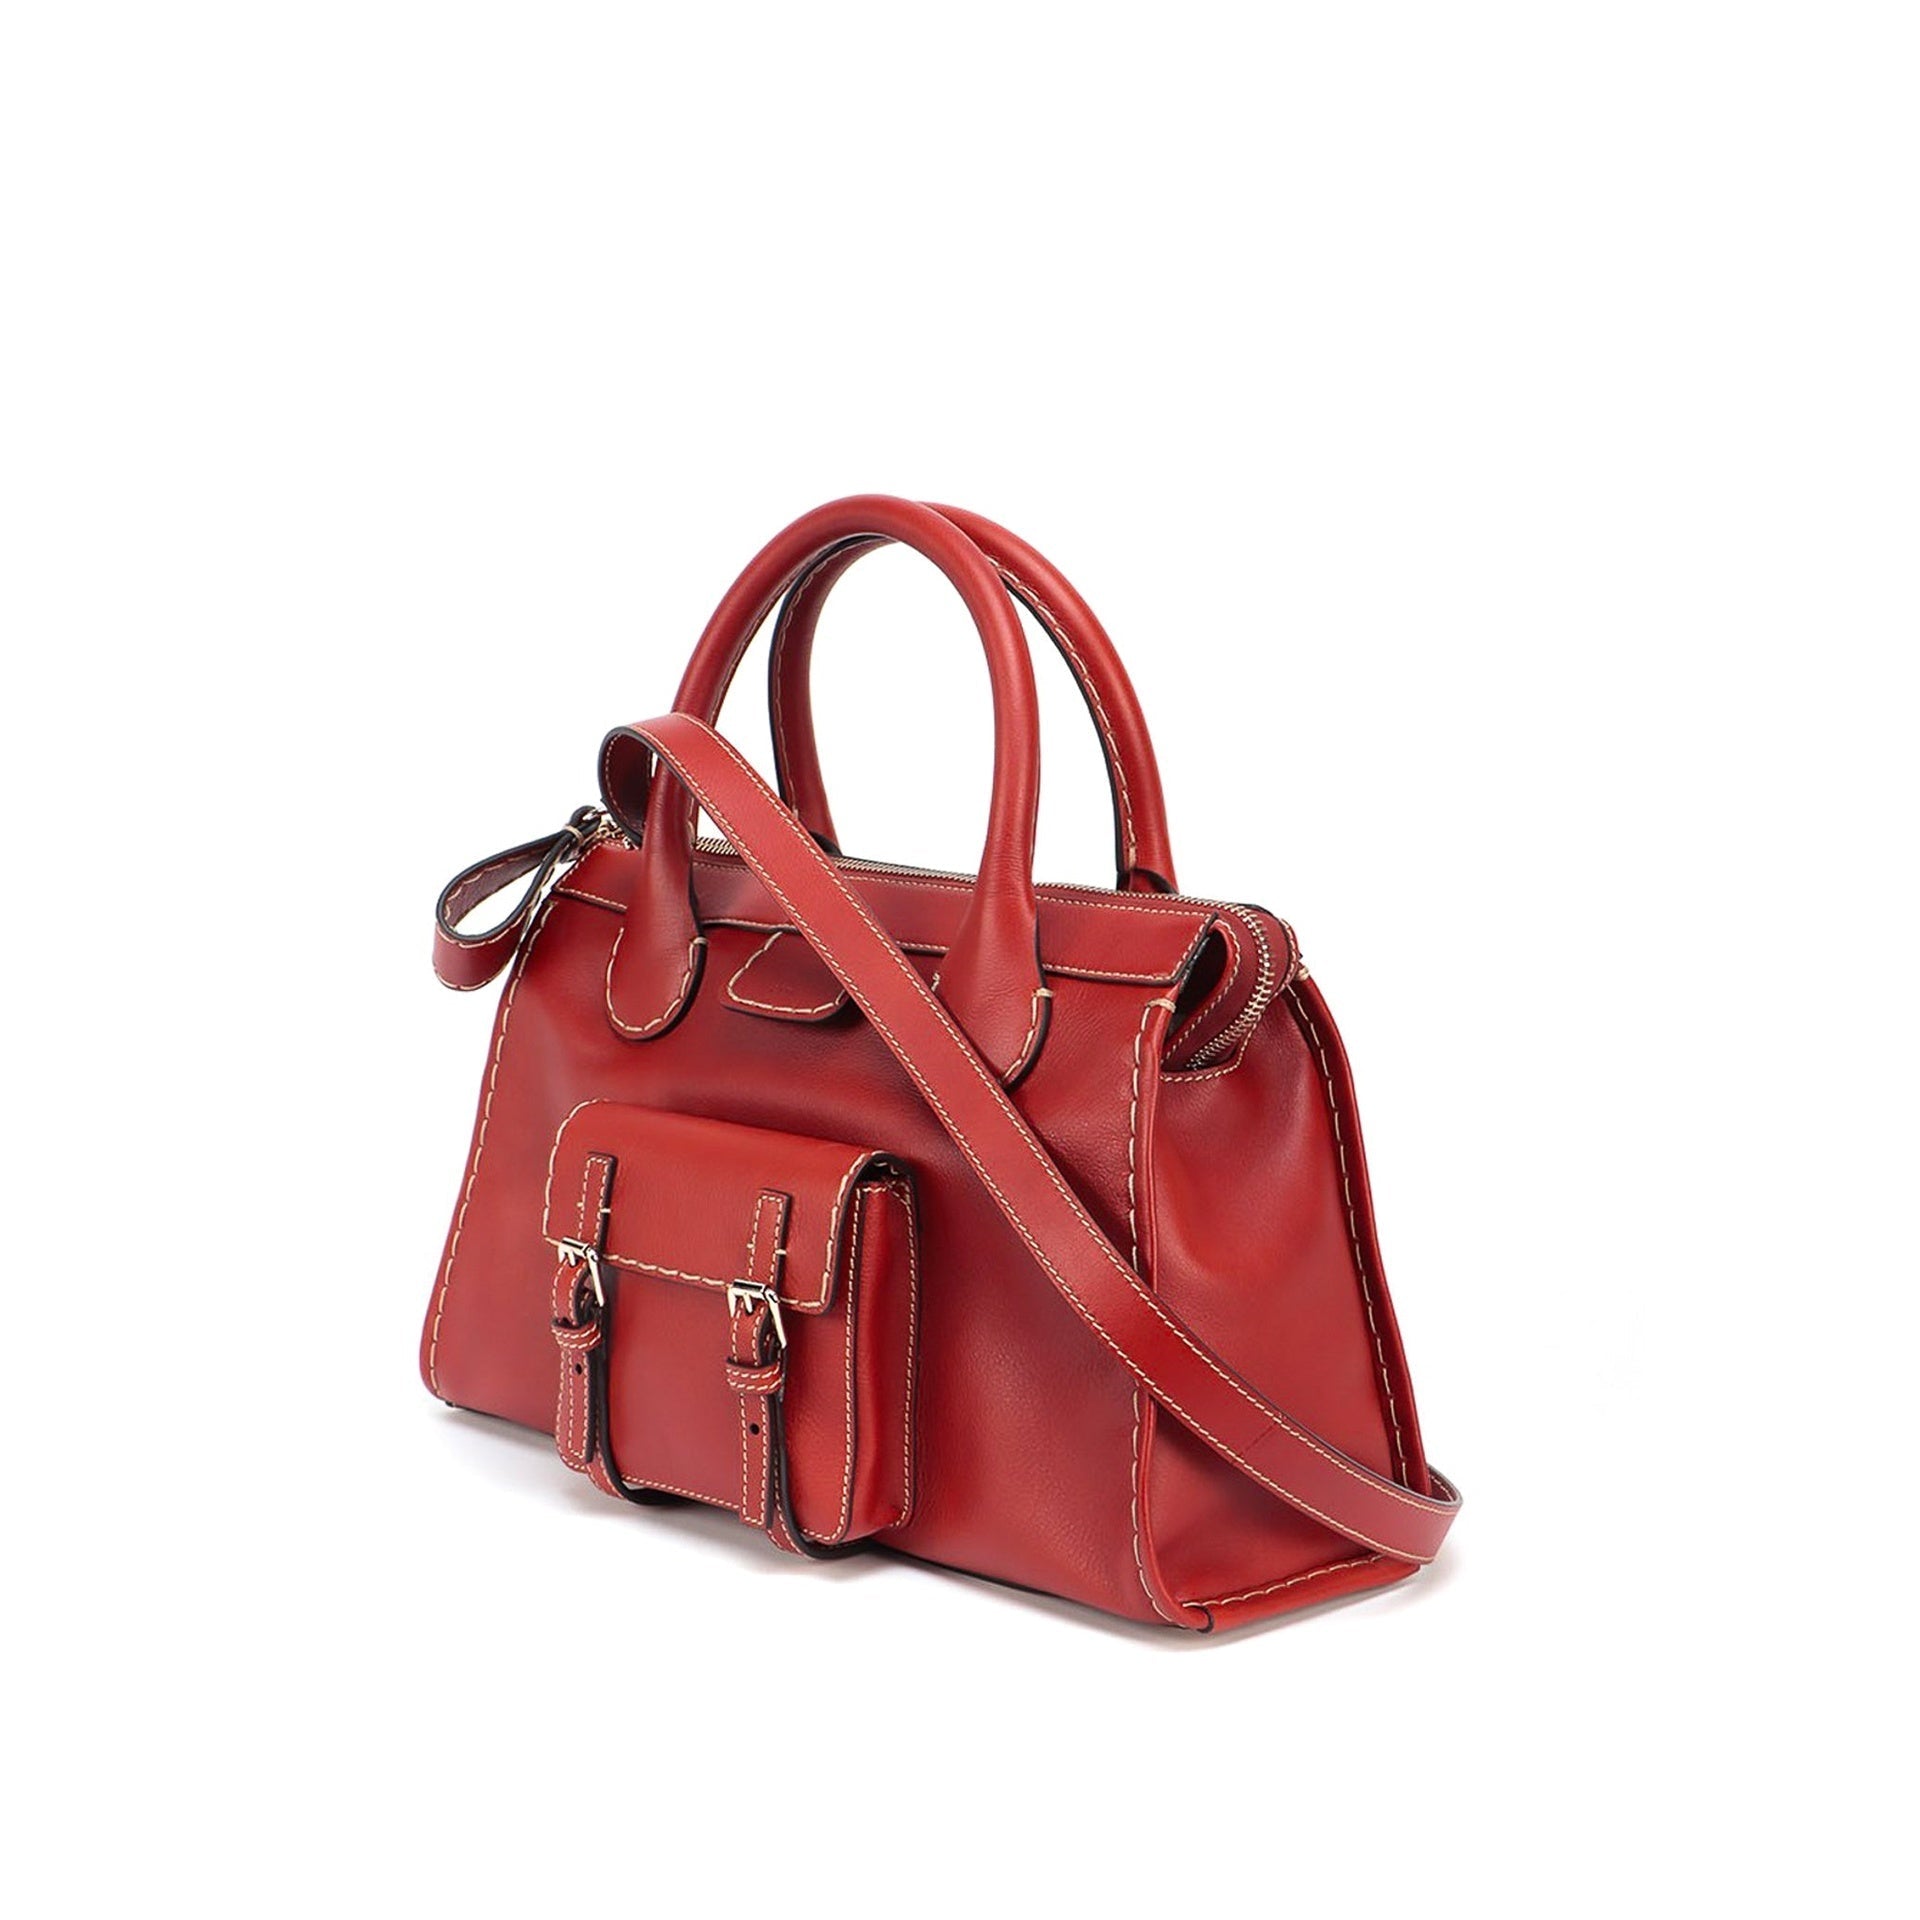 CHLOE-OUTLET-SALE-Chloe-Edith-Leather-Tote-Bag-Taschen-BROWN-UNI-ARCHIVE-COLLECTION-2.jpg